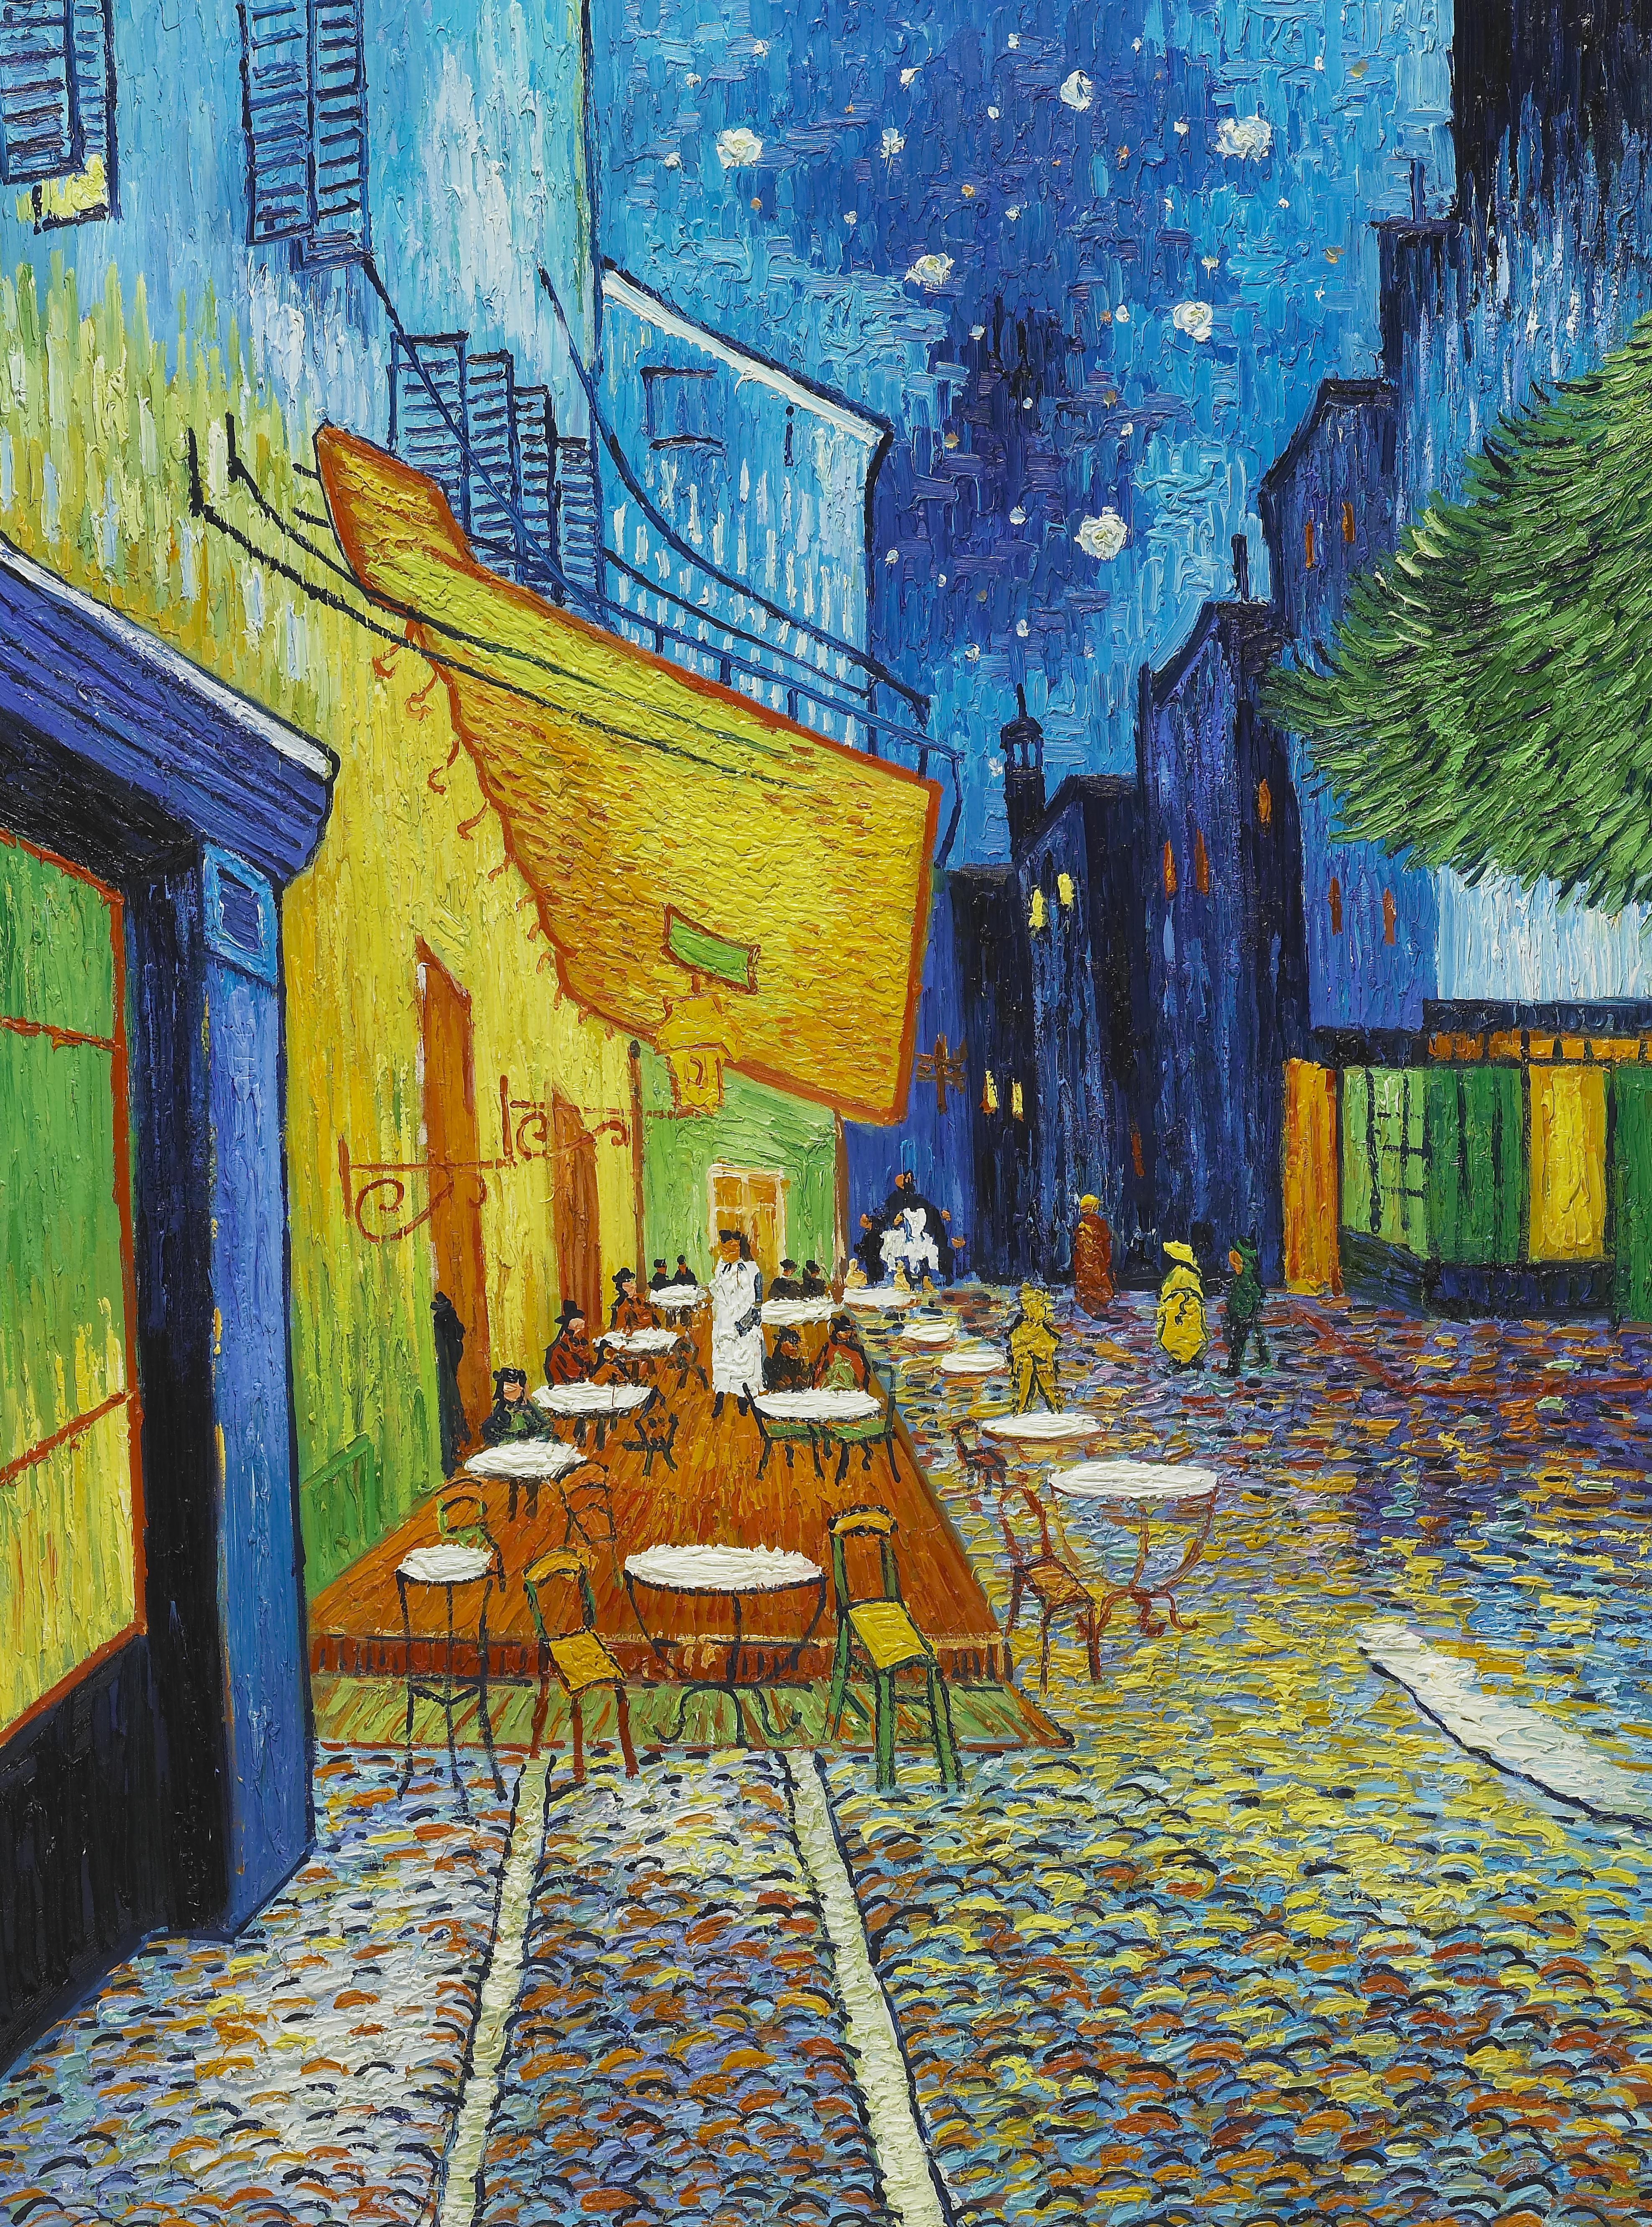 Van Gogh's Starry Night Named World's Most Popular Oil Painting of the